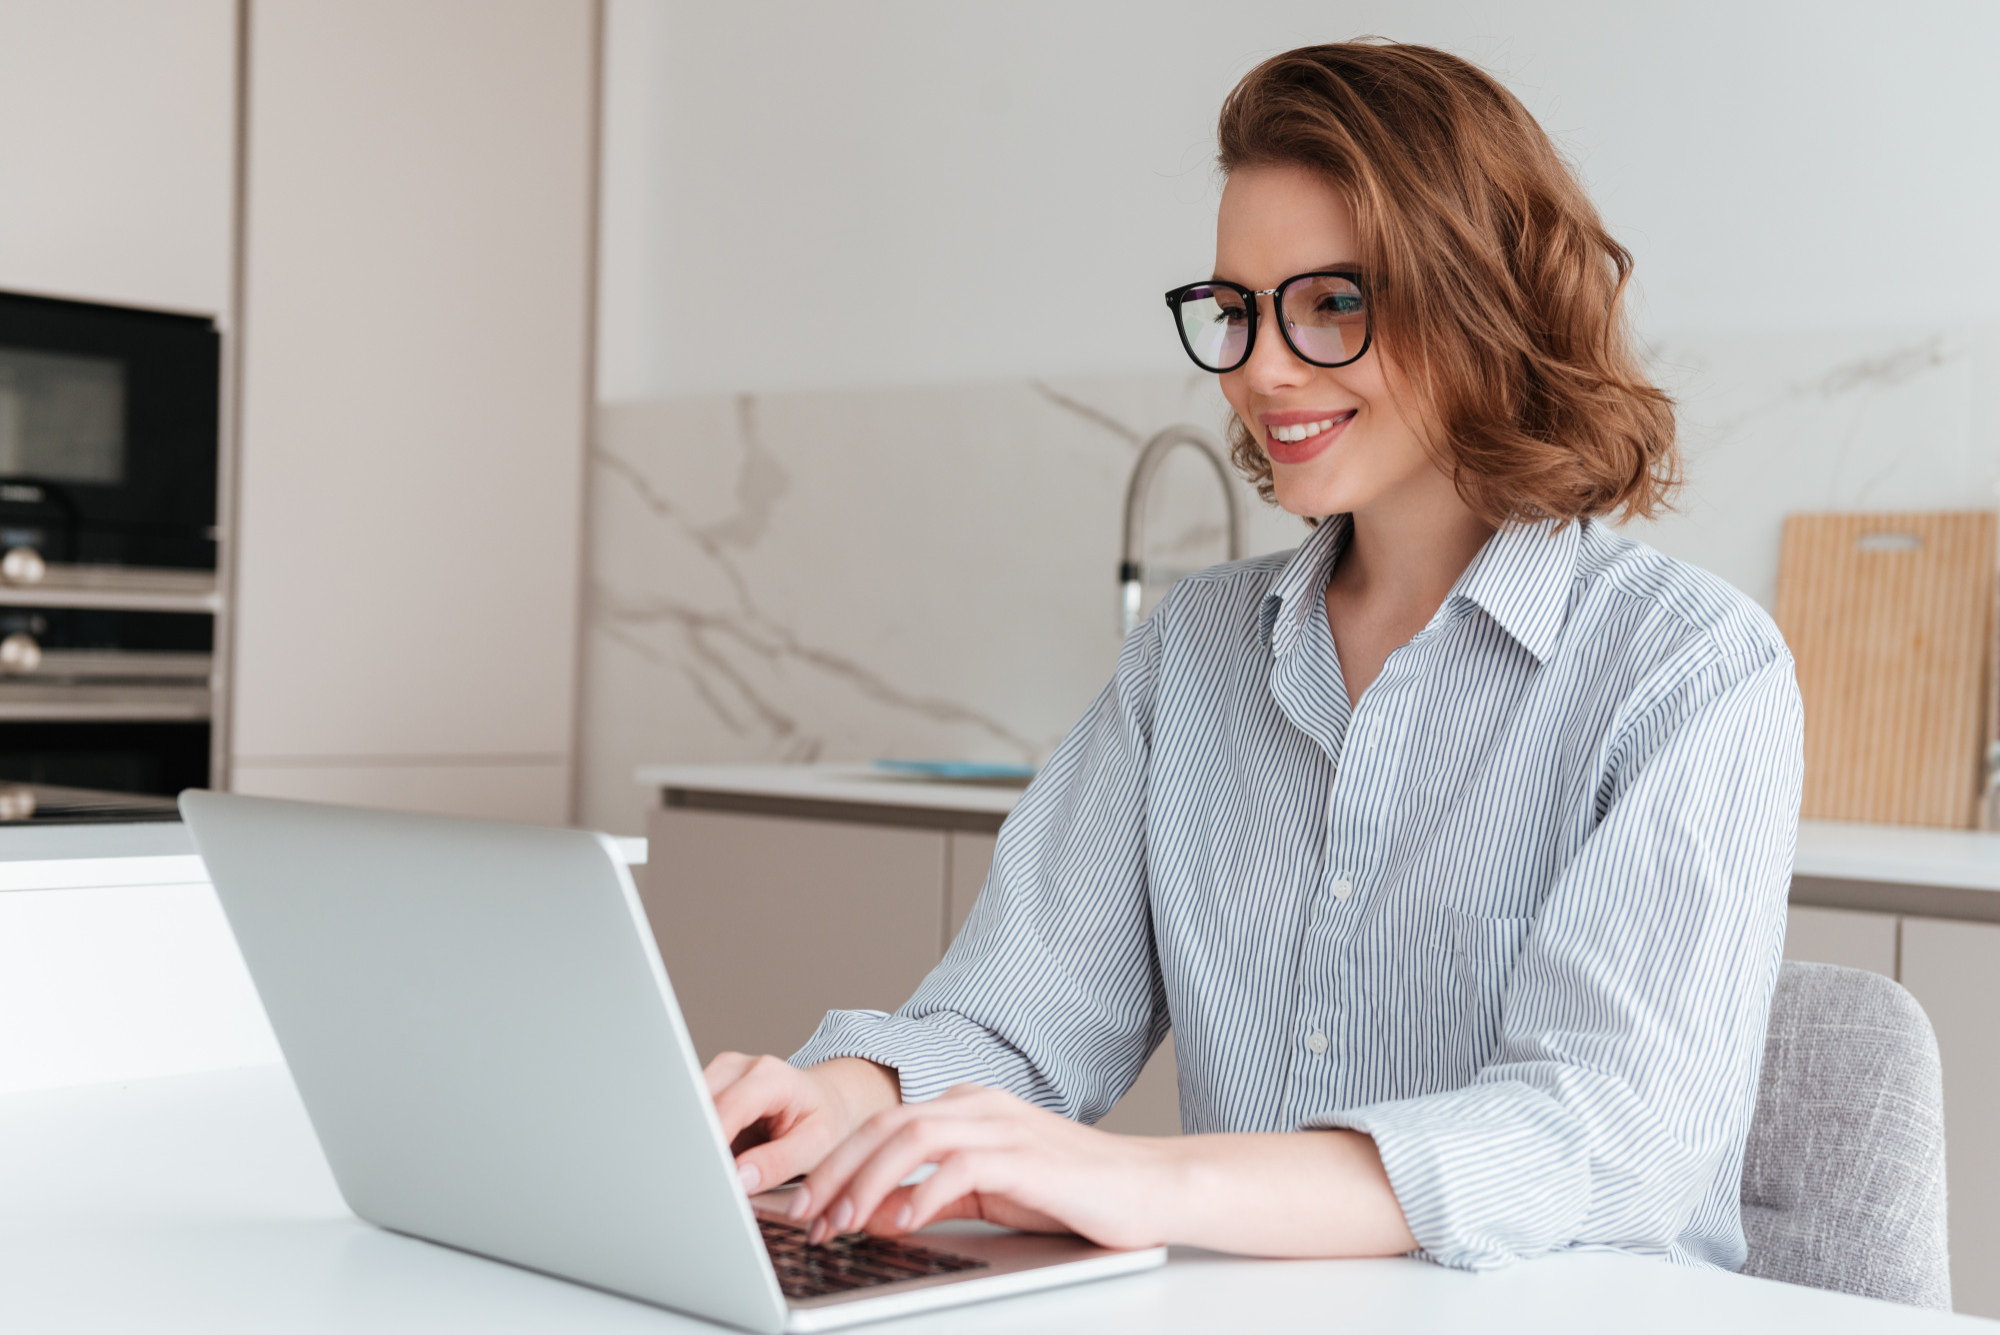 elegant-smiling-woman-glasses-striped-shirt-using-laptop-computer-while-siting-table-kitchen